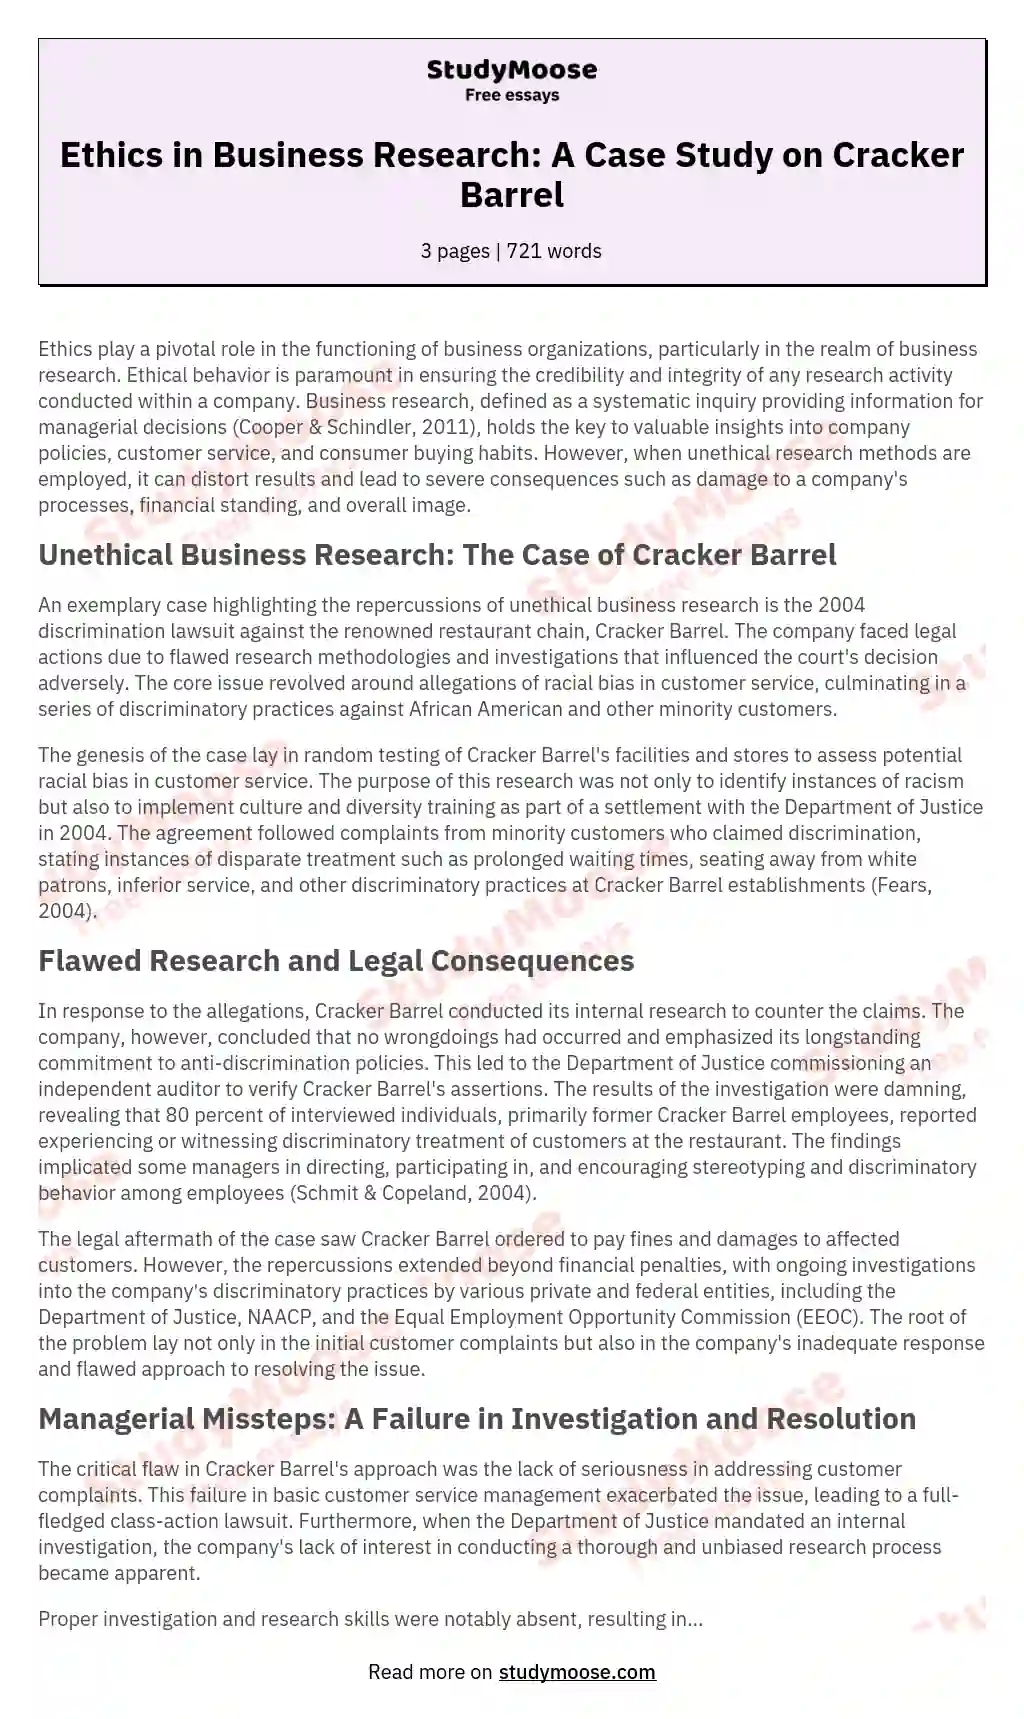 Ethics in Business Research: A Case Study on Cracker Barrel essay